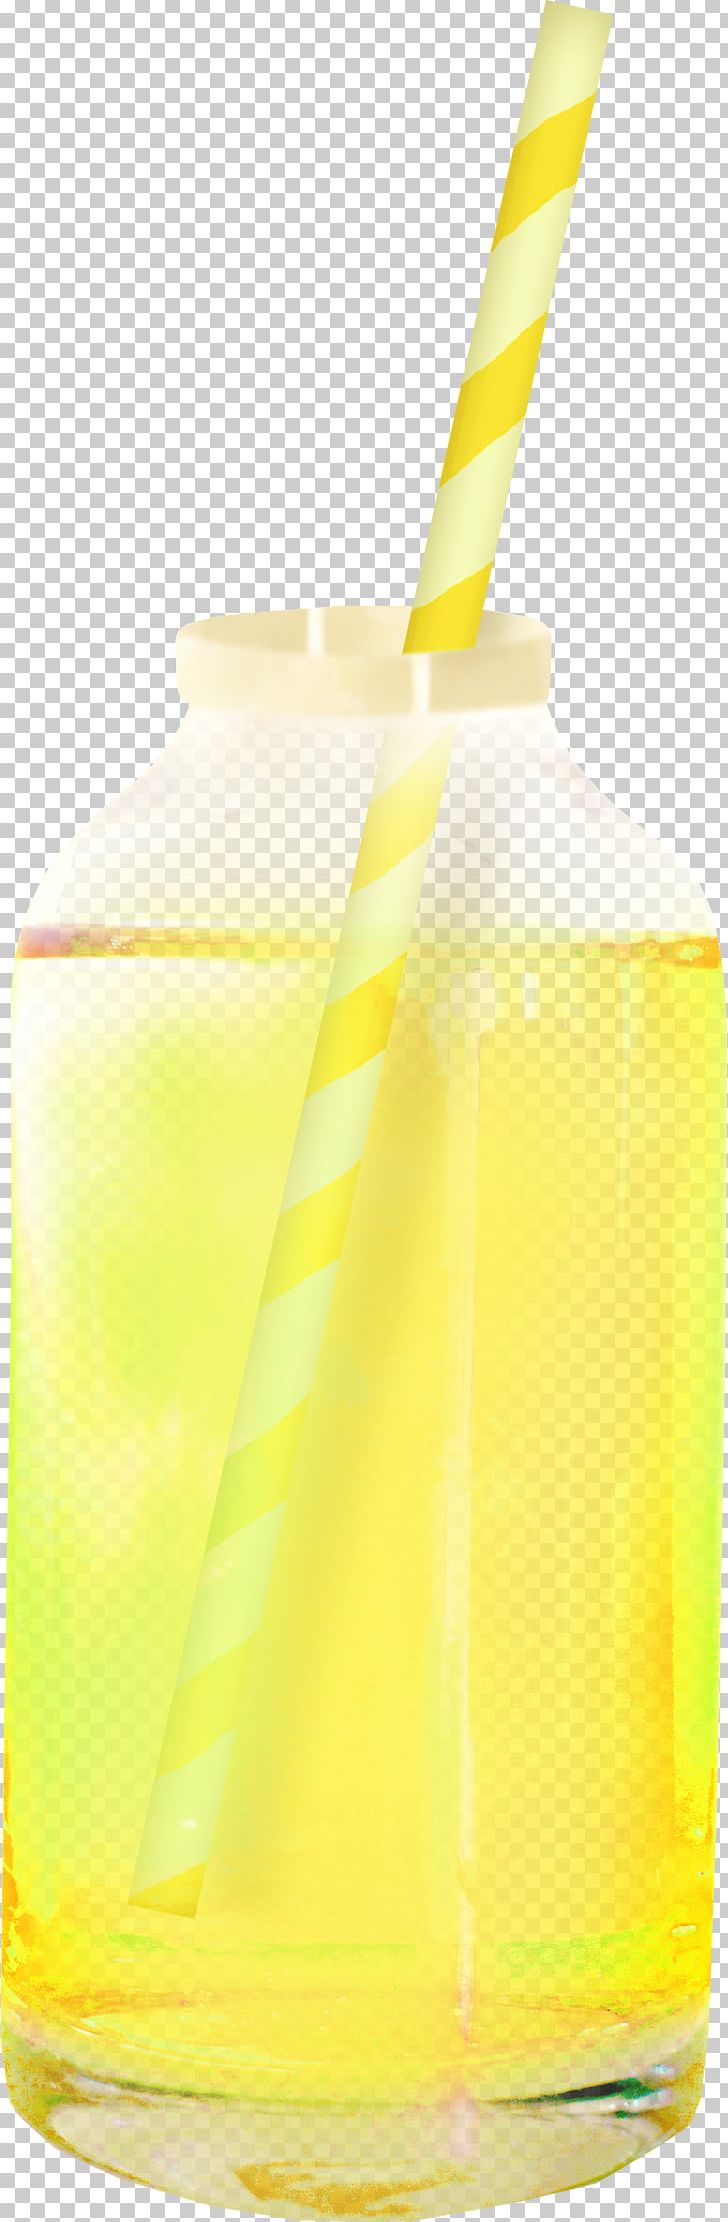 Harvey Wallbanger Juice Orange Drink Lemonade Non-alcoholic Drink PNG, Clipart, Beverage, Beverage Cup, Cocktail, Coffee Cup, Creative Background Free PNG Download